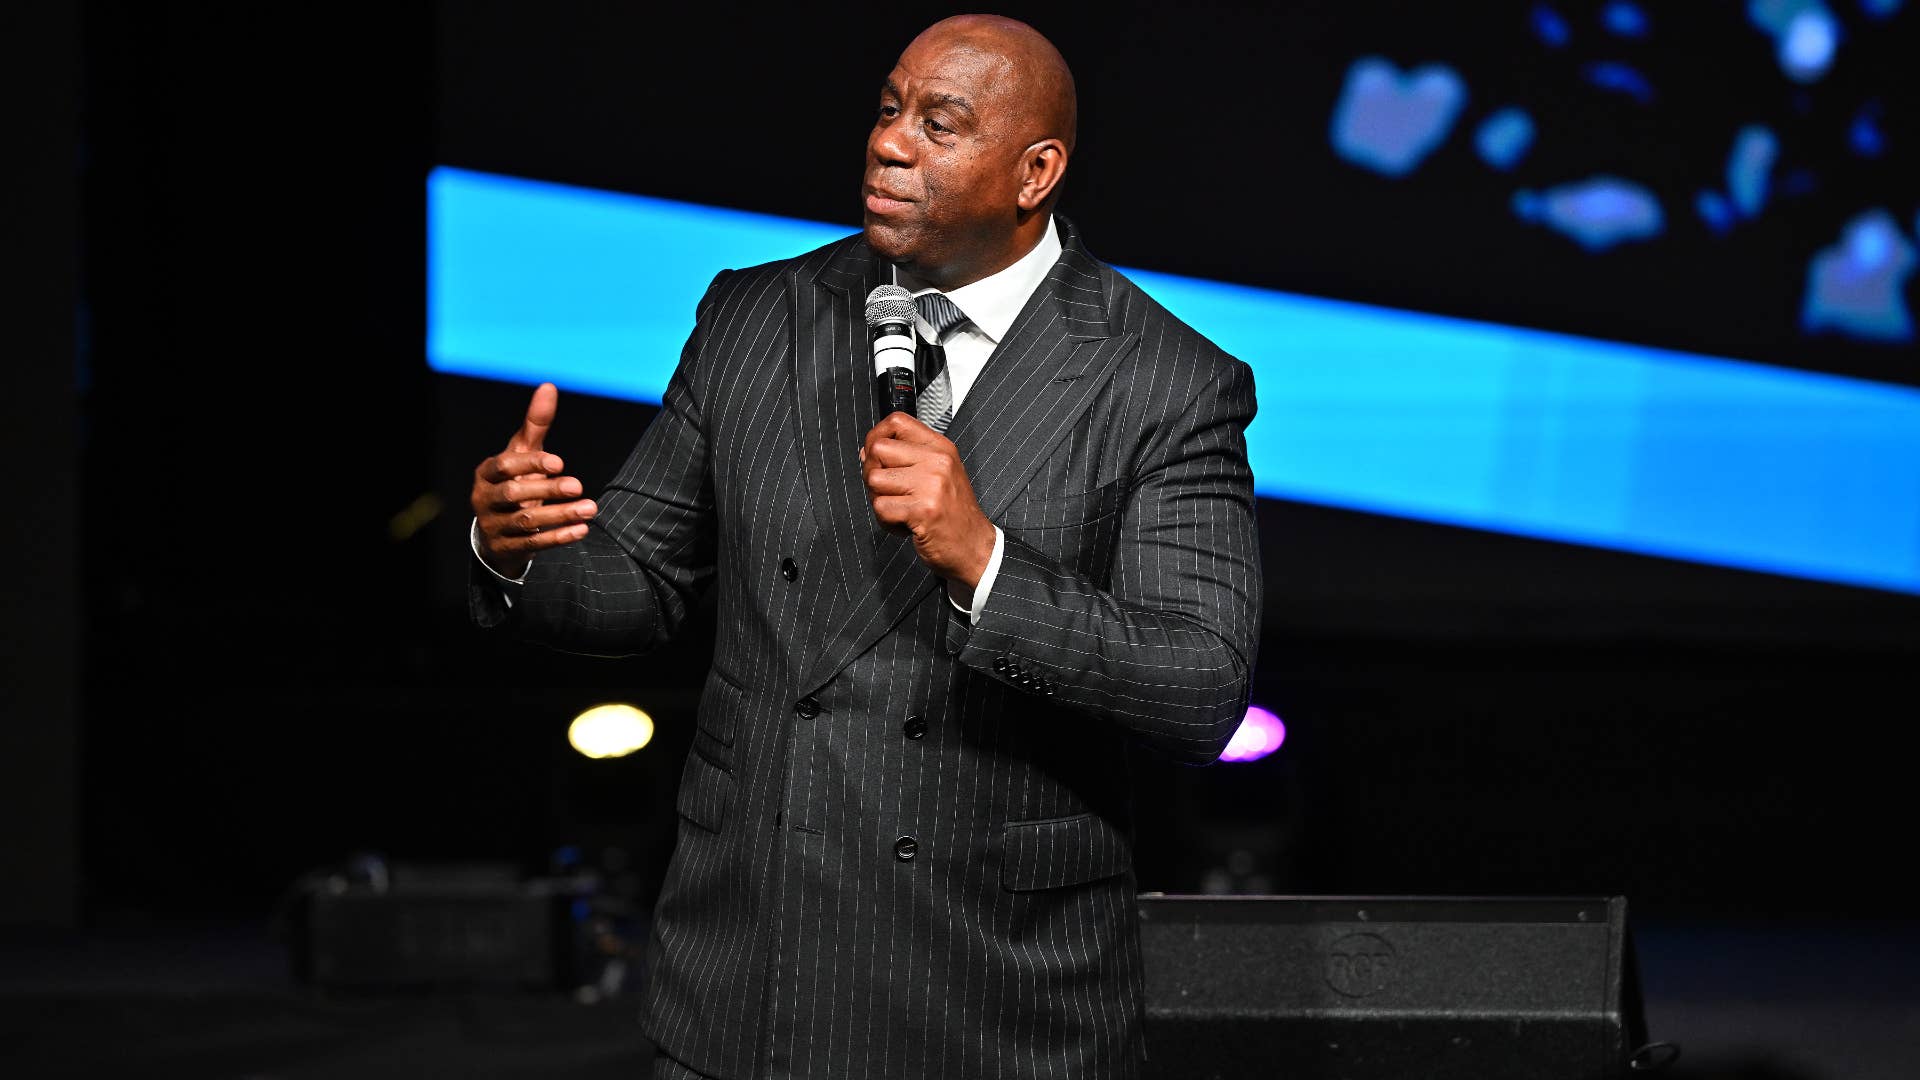 Magic Johnson is pictured speaking at an event